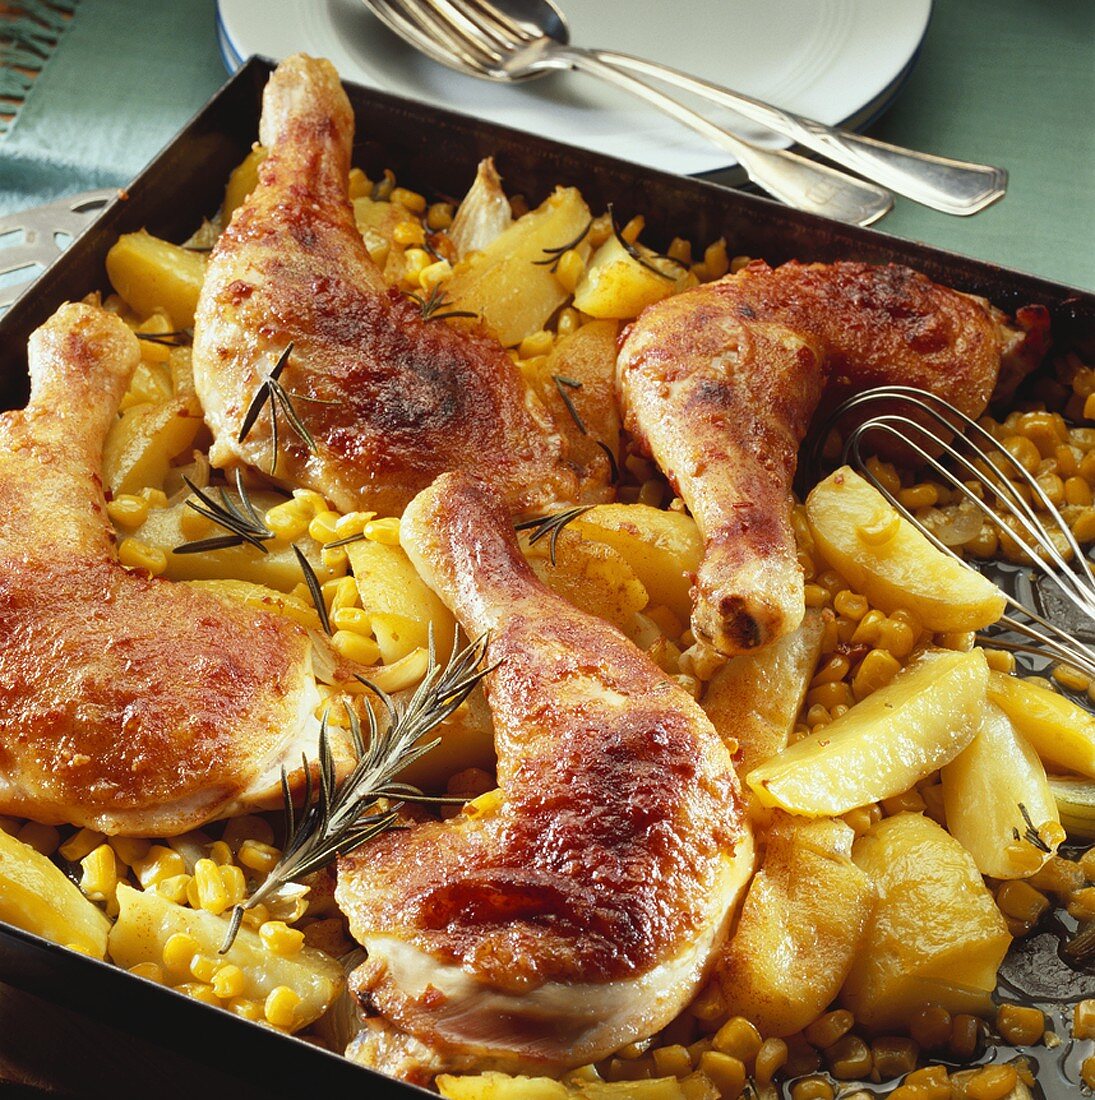 Chicken legs on potatoes and sweetcorn